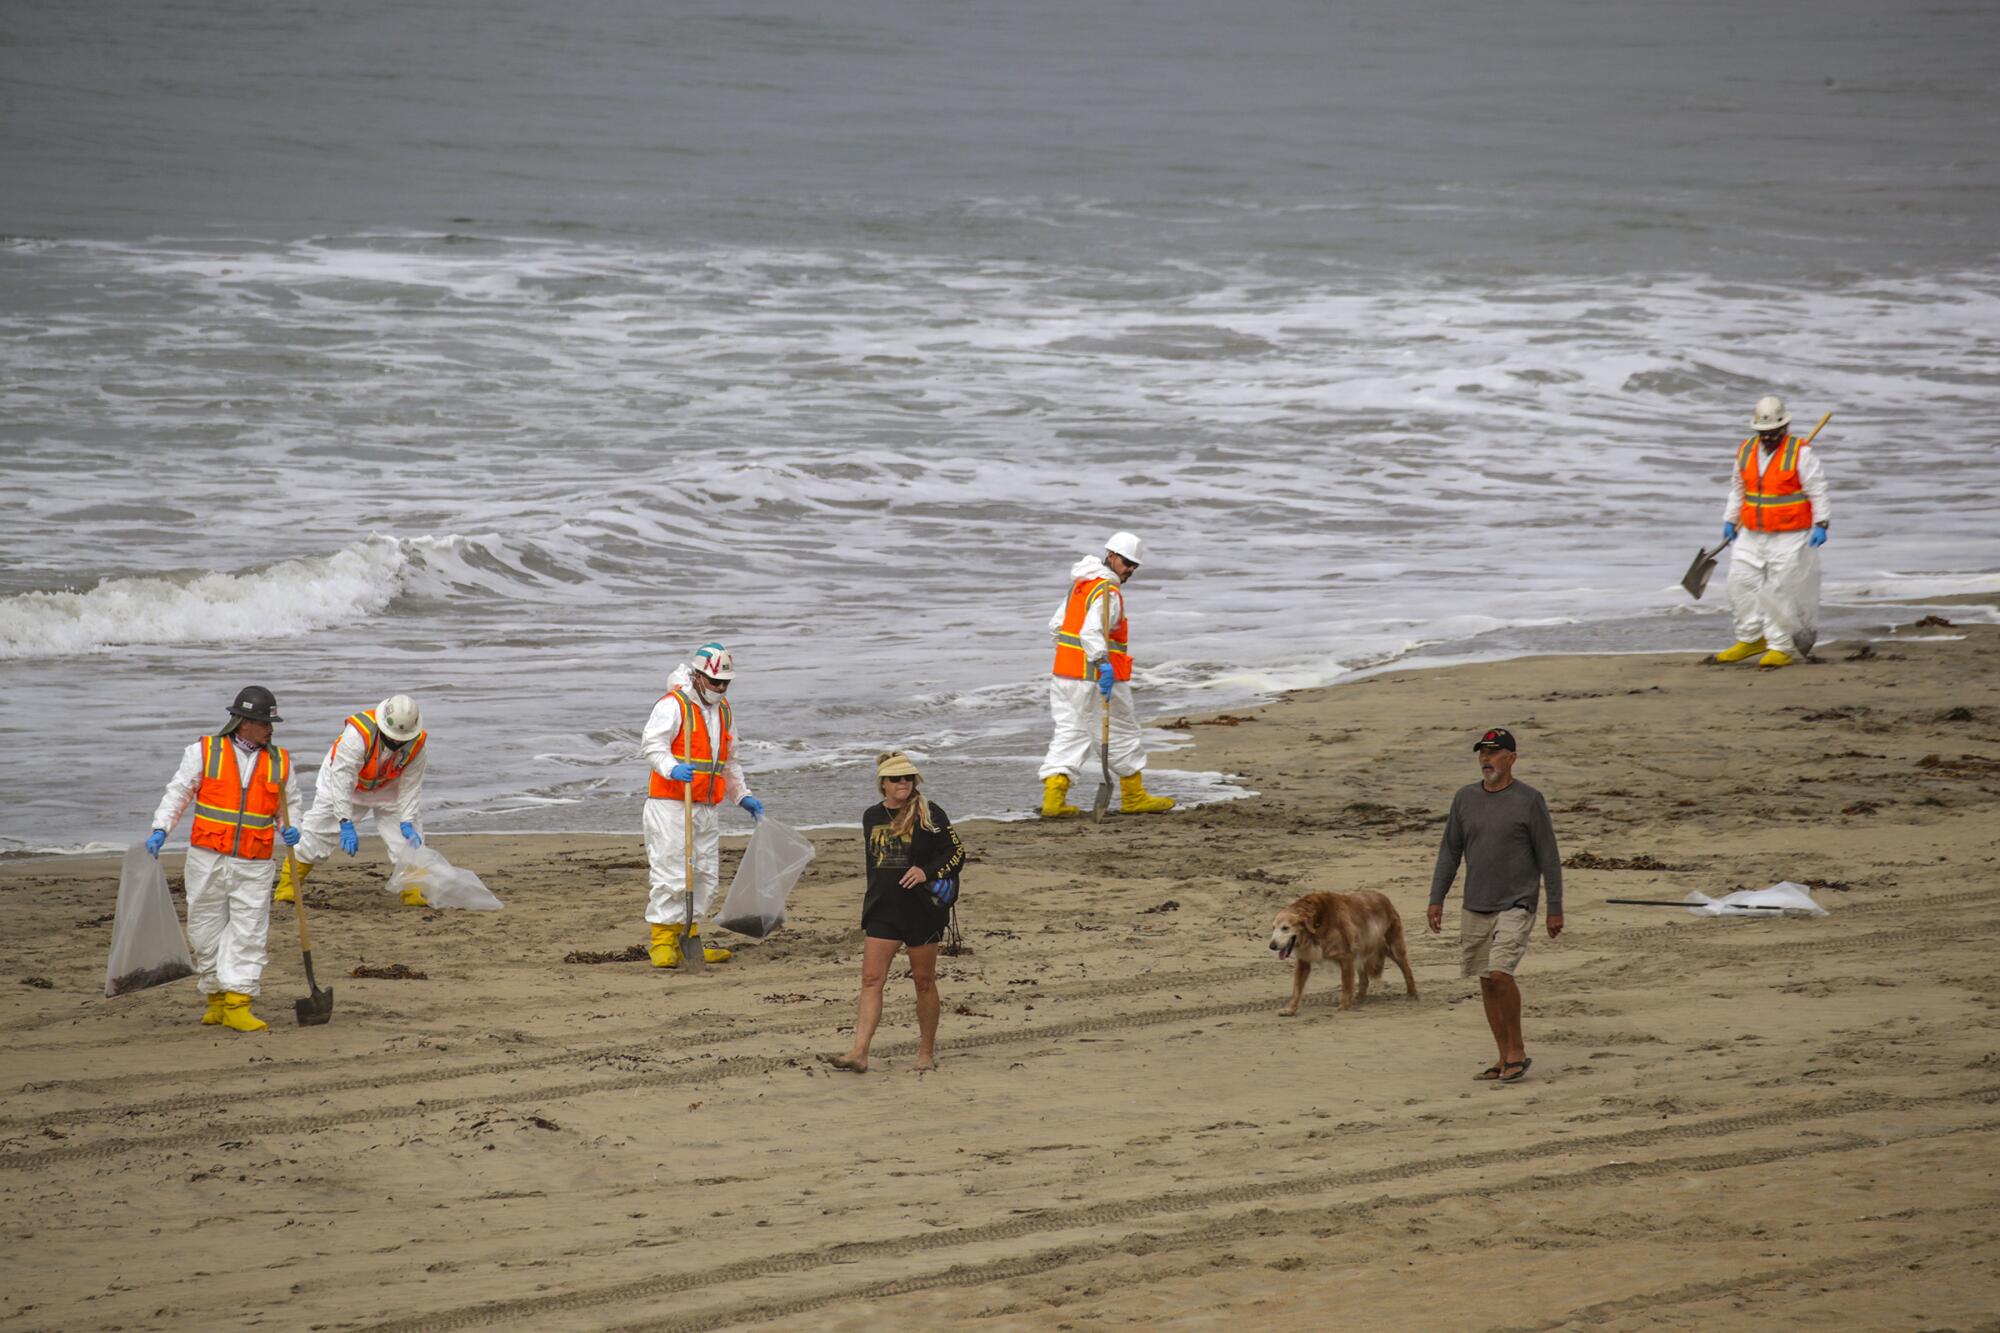 Workers in protective gear comb the beach for oil.